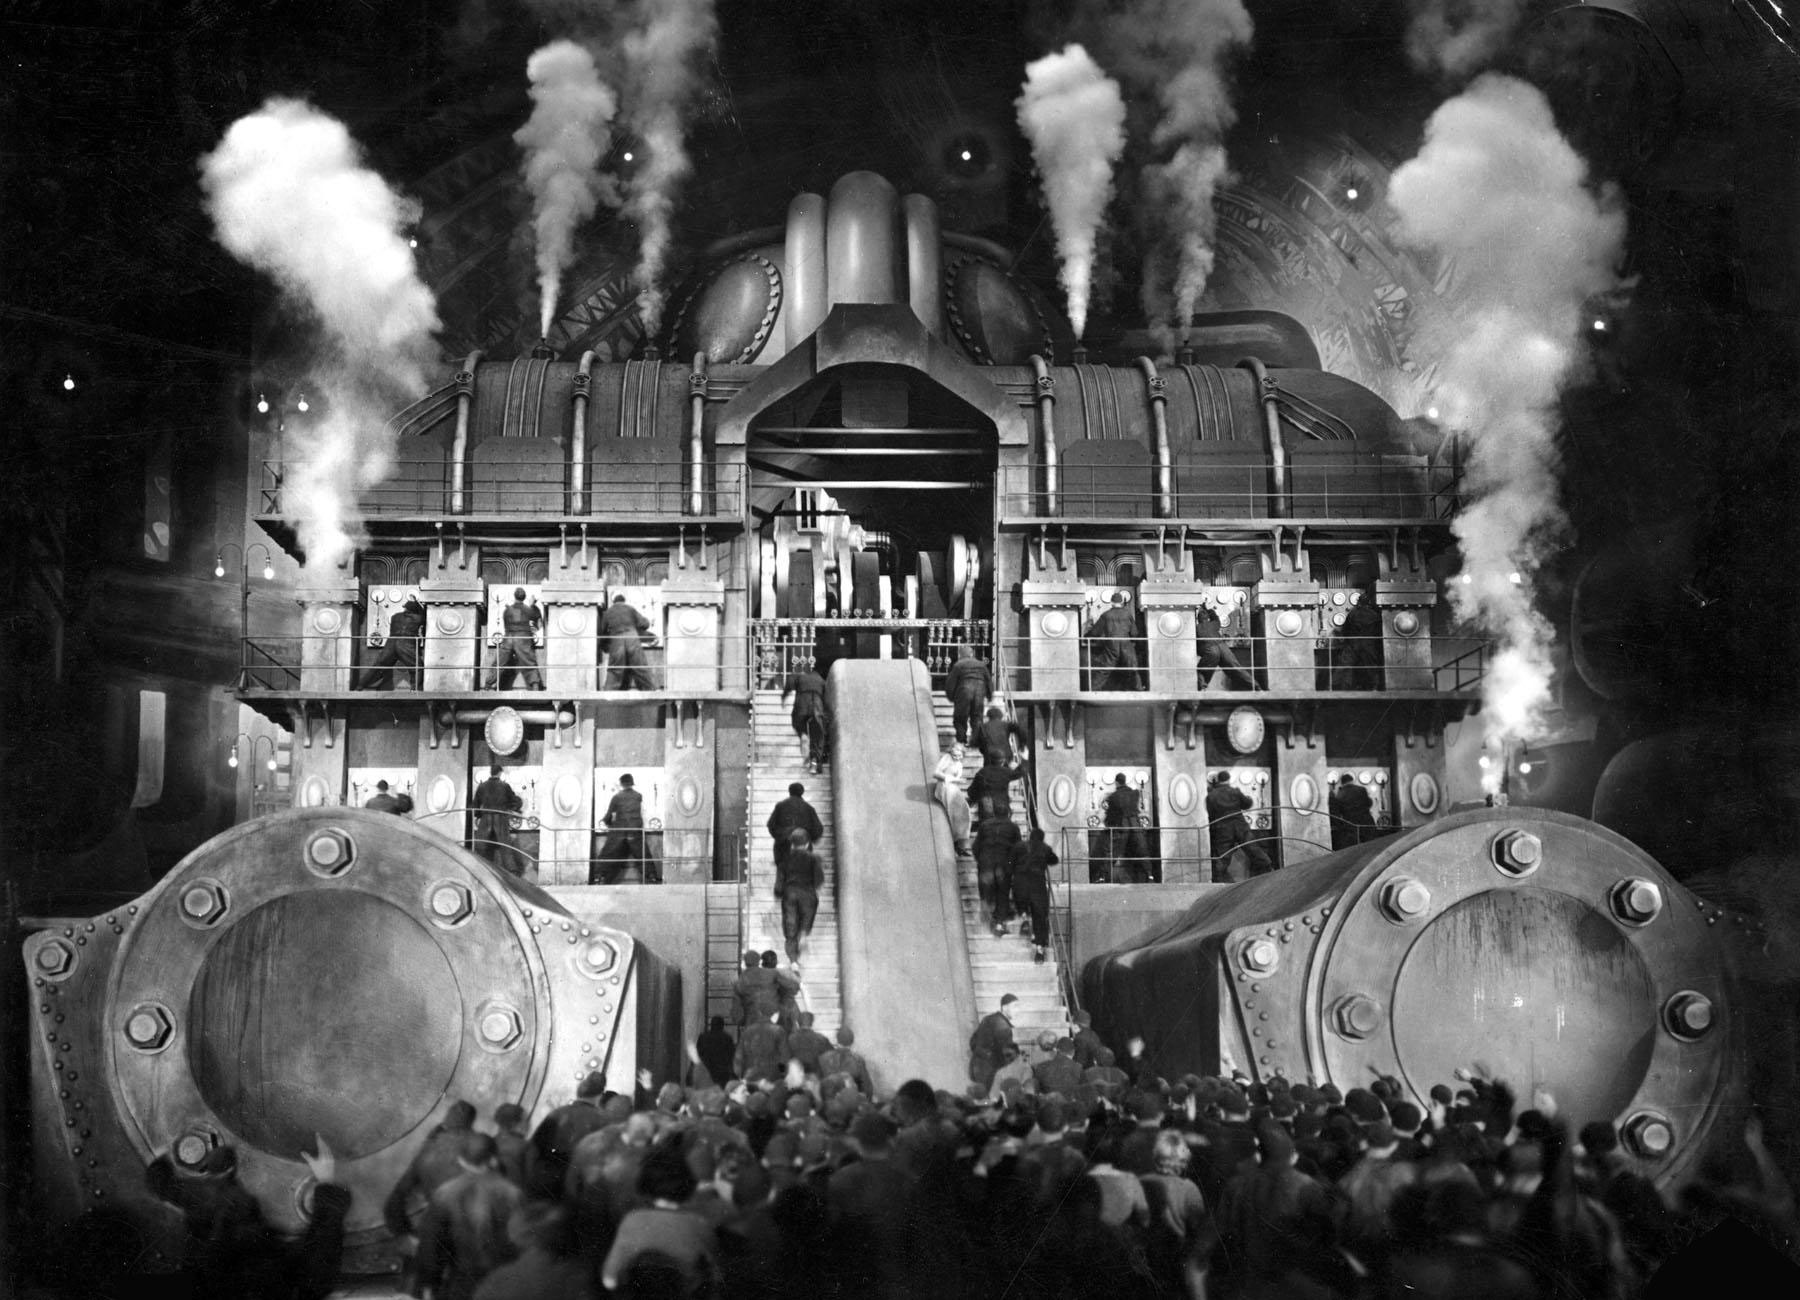 Visions of the city as Moloch in Metropolis (1927)